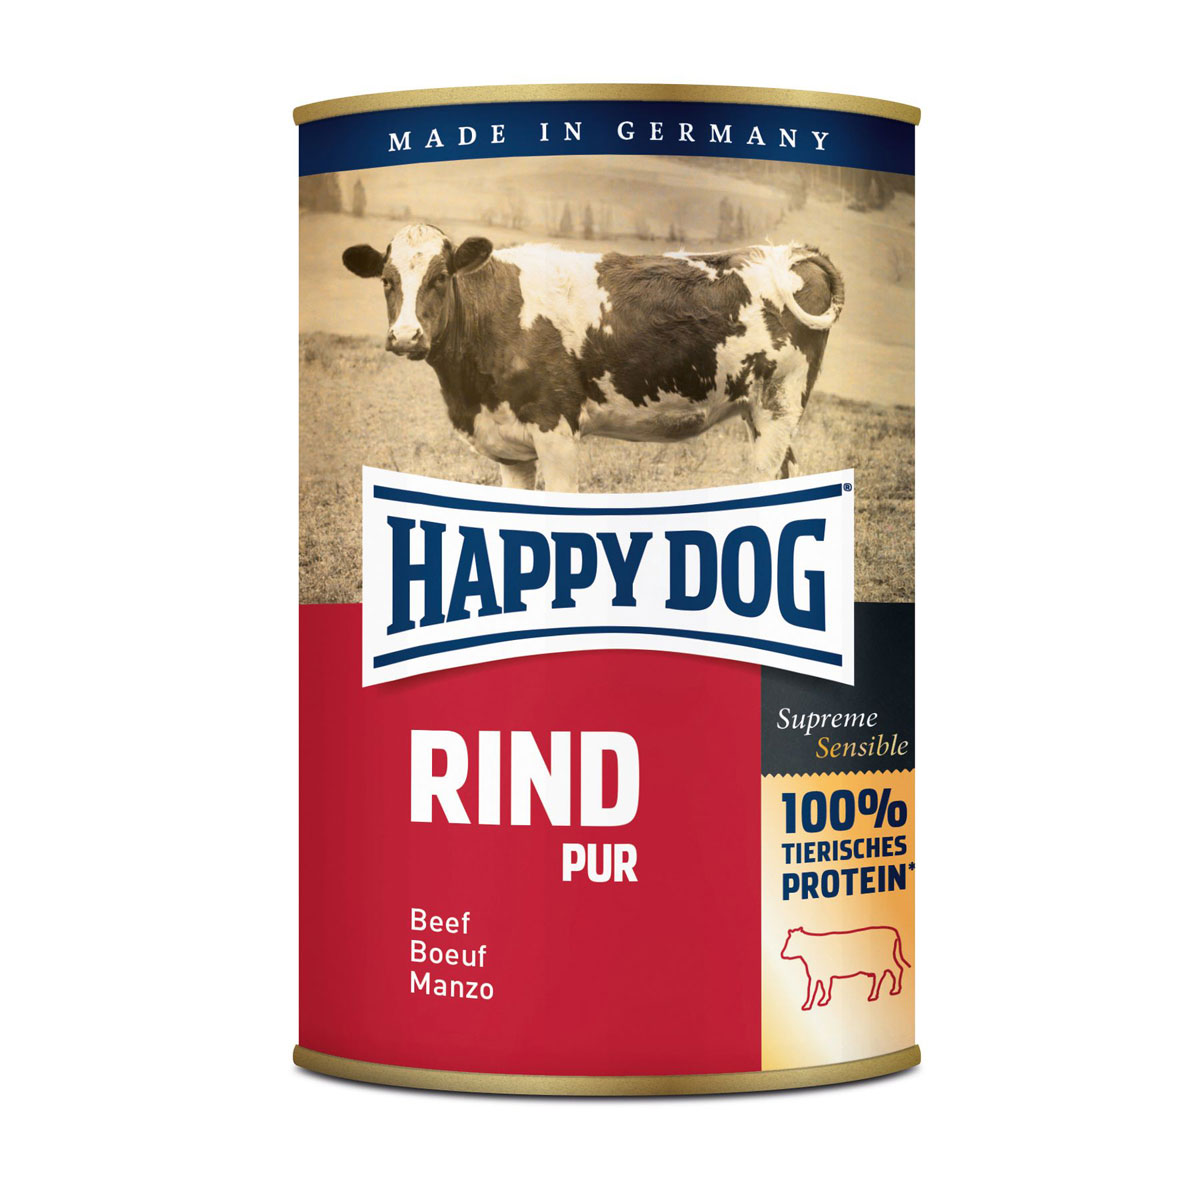 Dose Rind Pur 400g